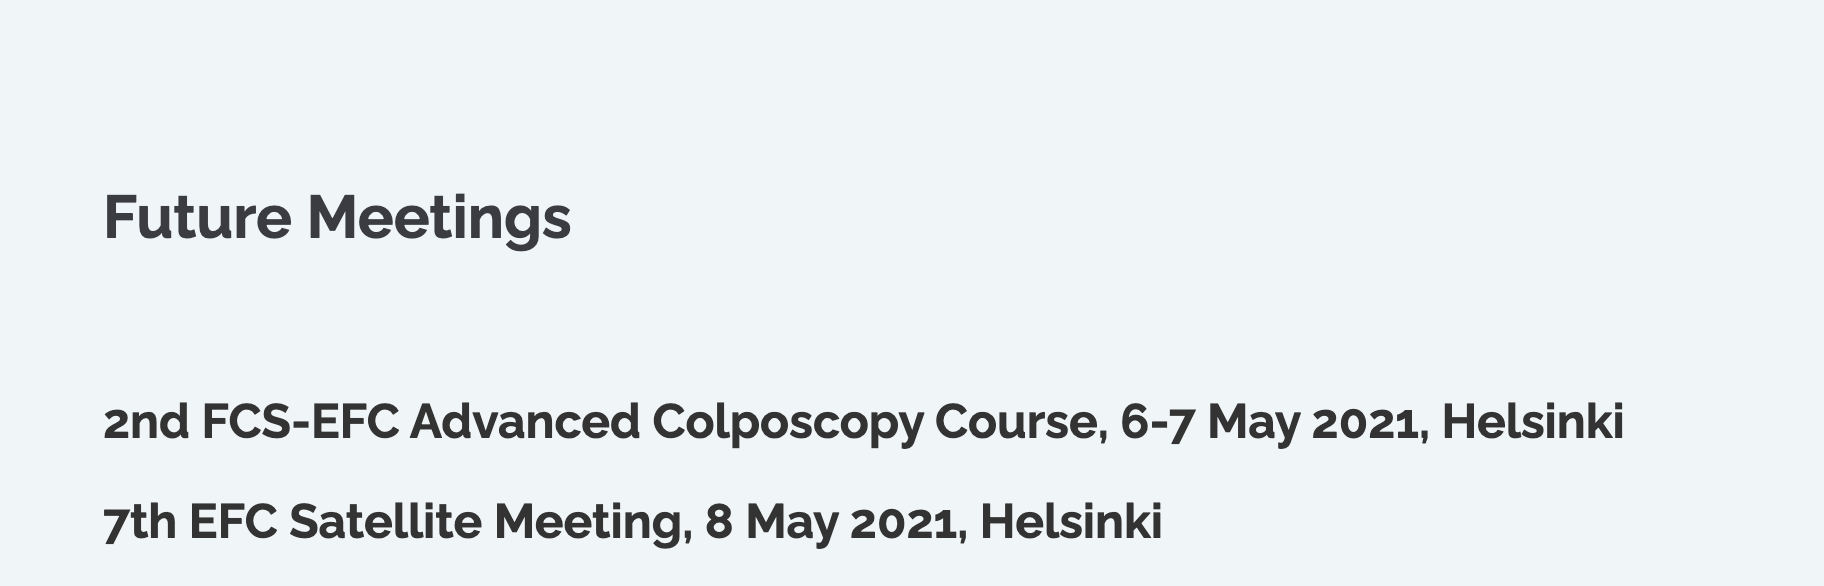 2nd FCS-EFC Advanced Colposcopy Course and the Satellite Meeting 2021